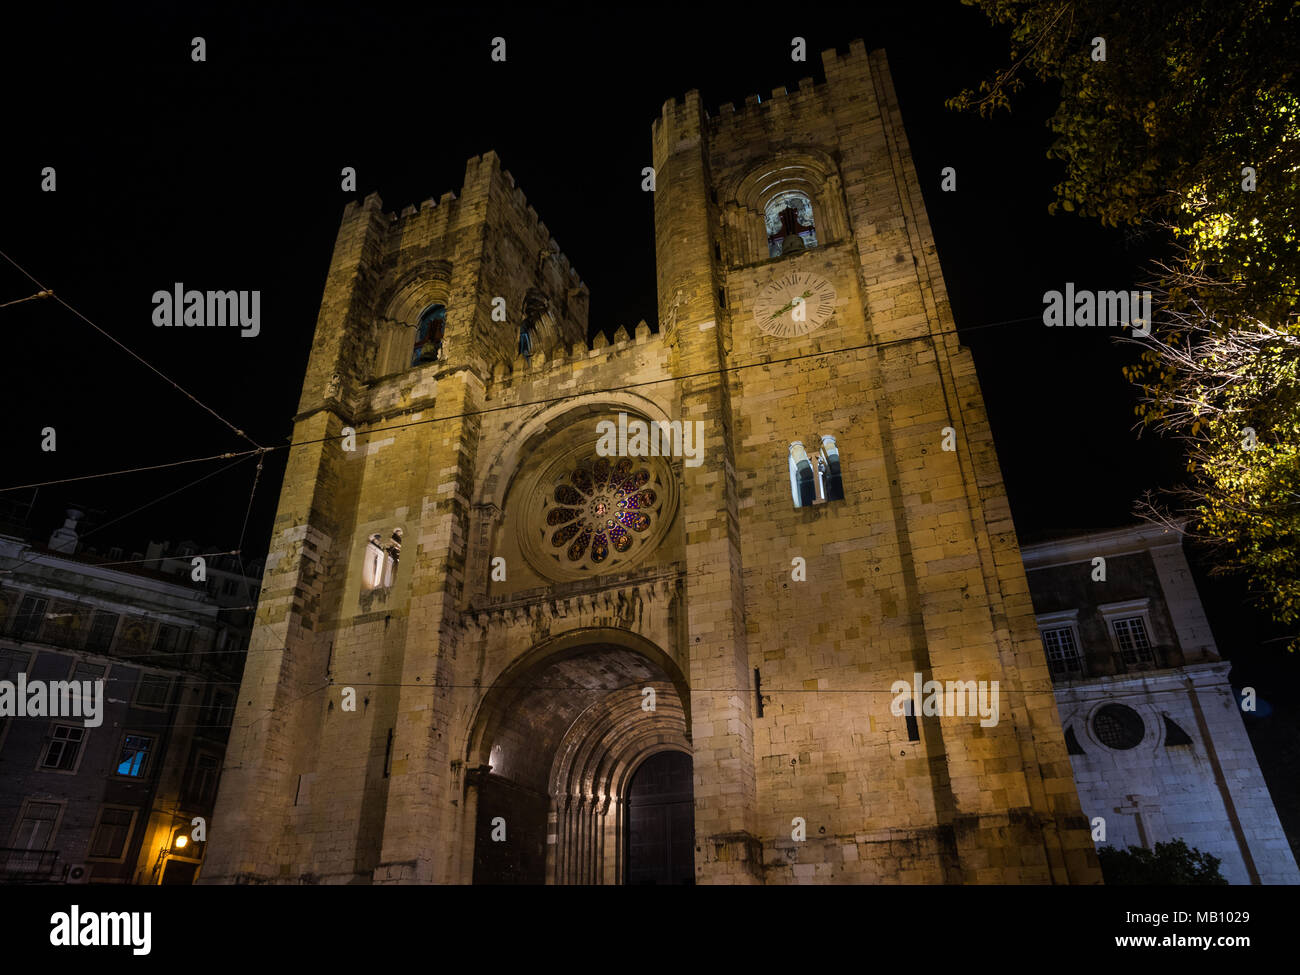 Night view of the beautiful medieval facade of Cathedral of Saint Mary Major in Lisbon, built in the 12th century Stock Photo